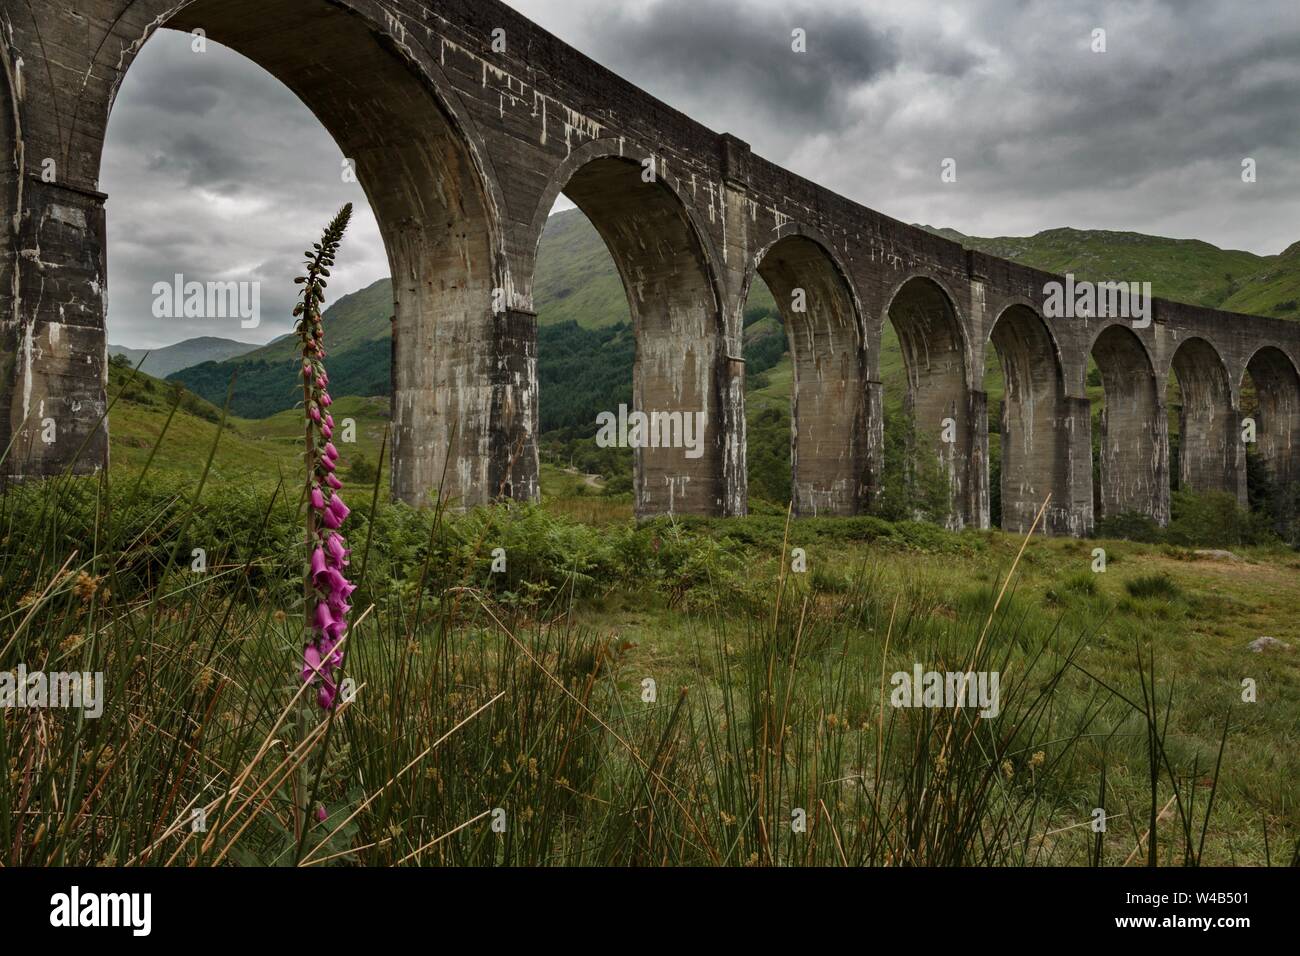 Foxglove in front of Glenfinnan Viaduct, Scotland, Harry Potter filming location Stock Photo